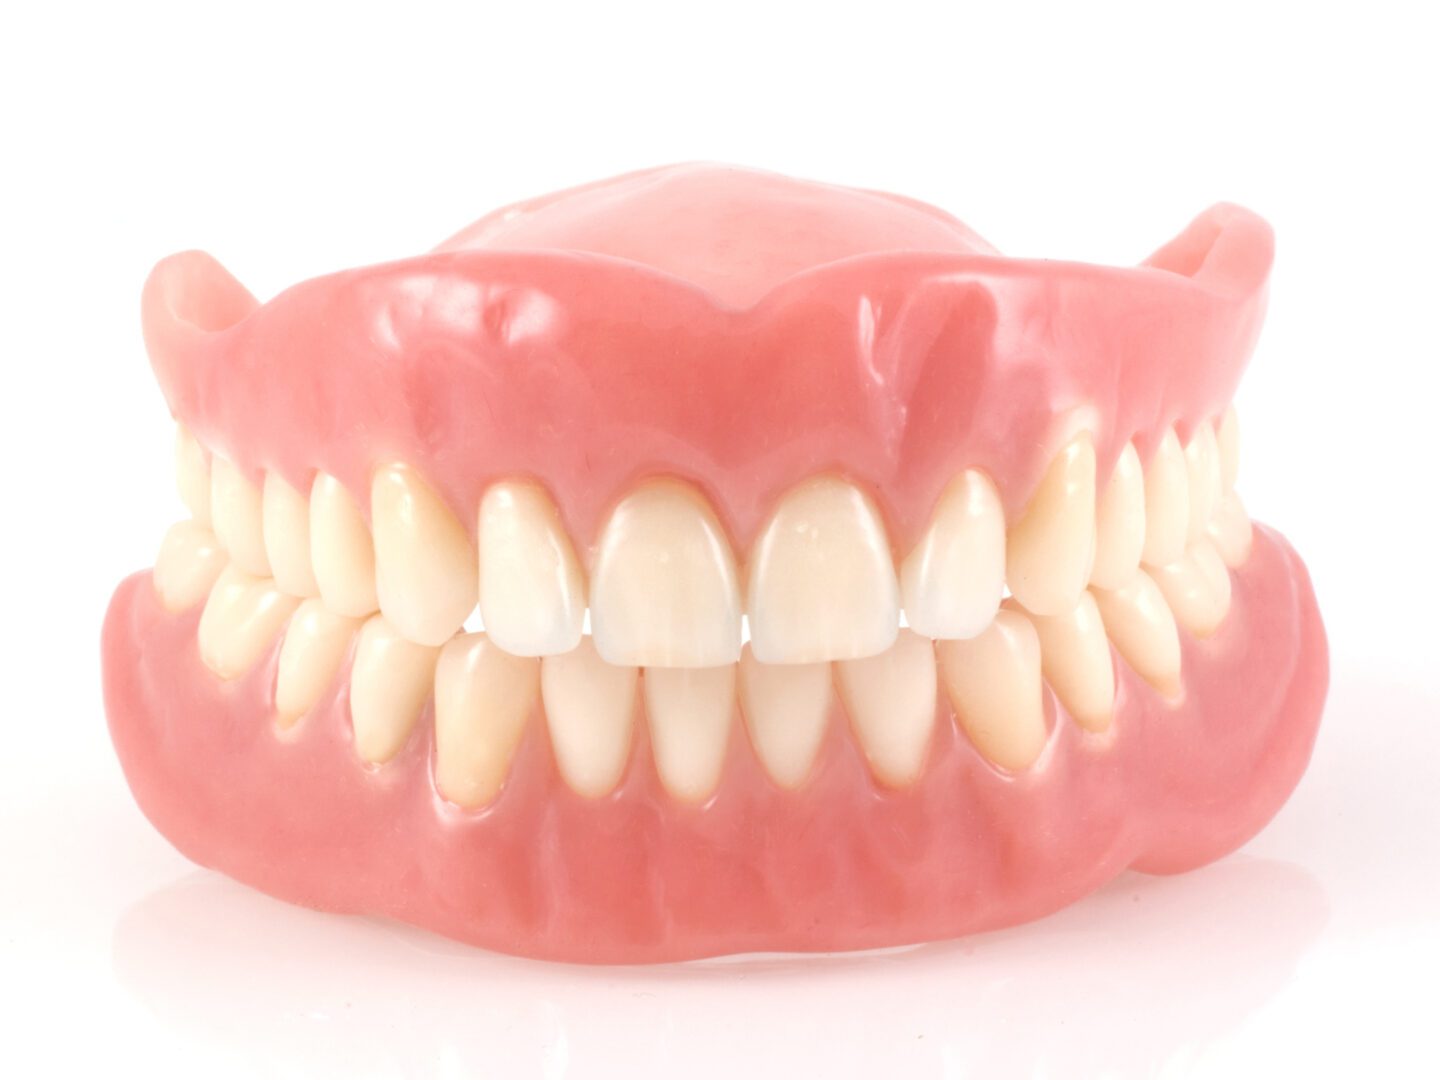 A close up of the teeth and gums of an artificial denture